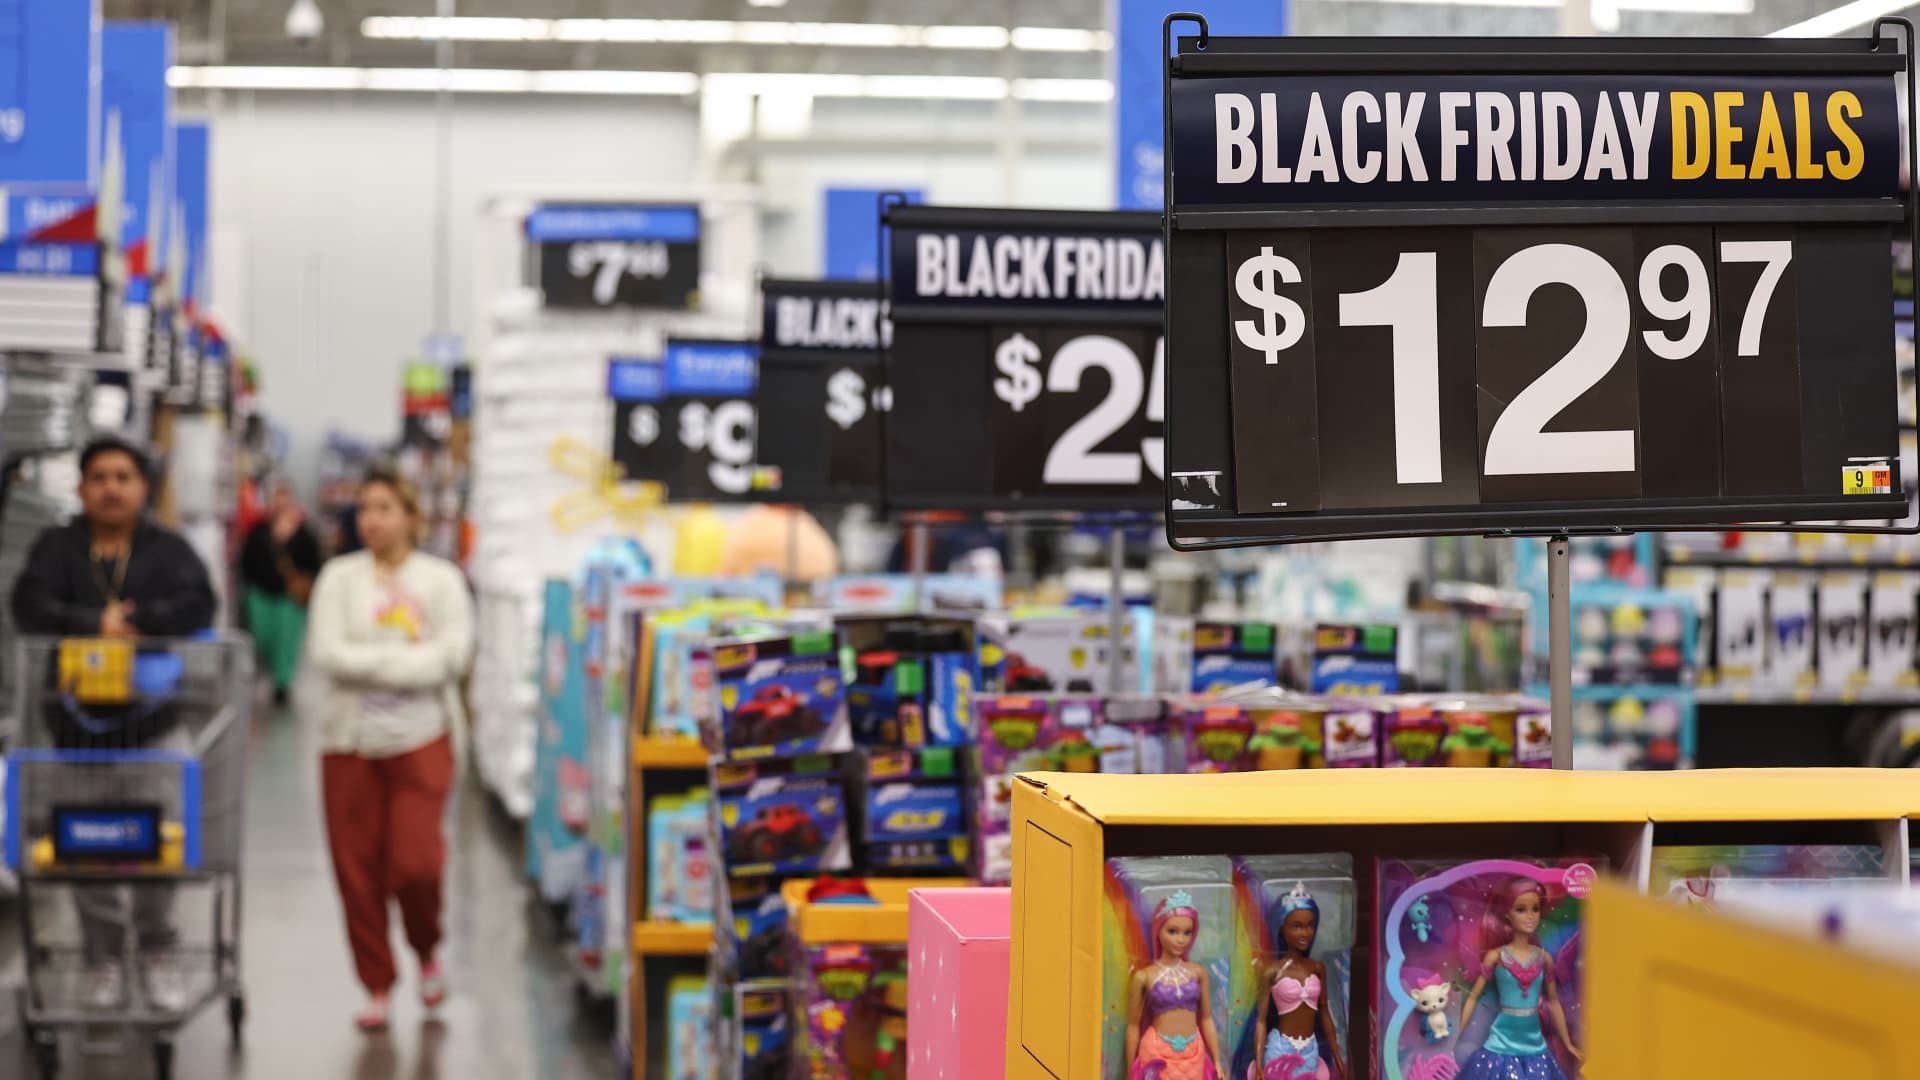 Black Friday came early this year, signaling worries about holiday demand